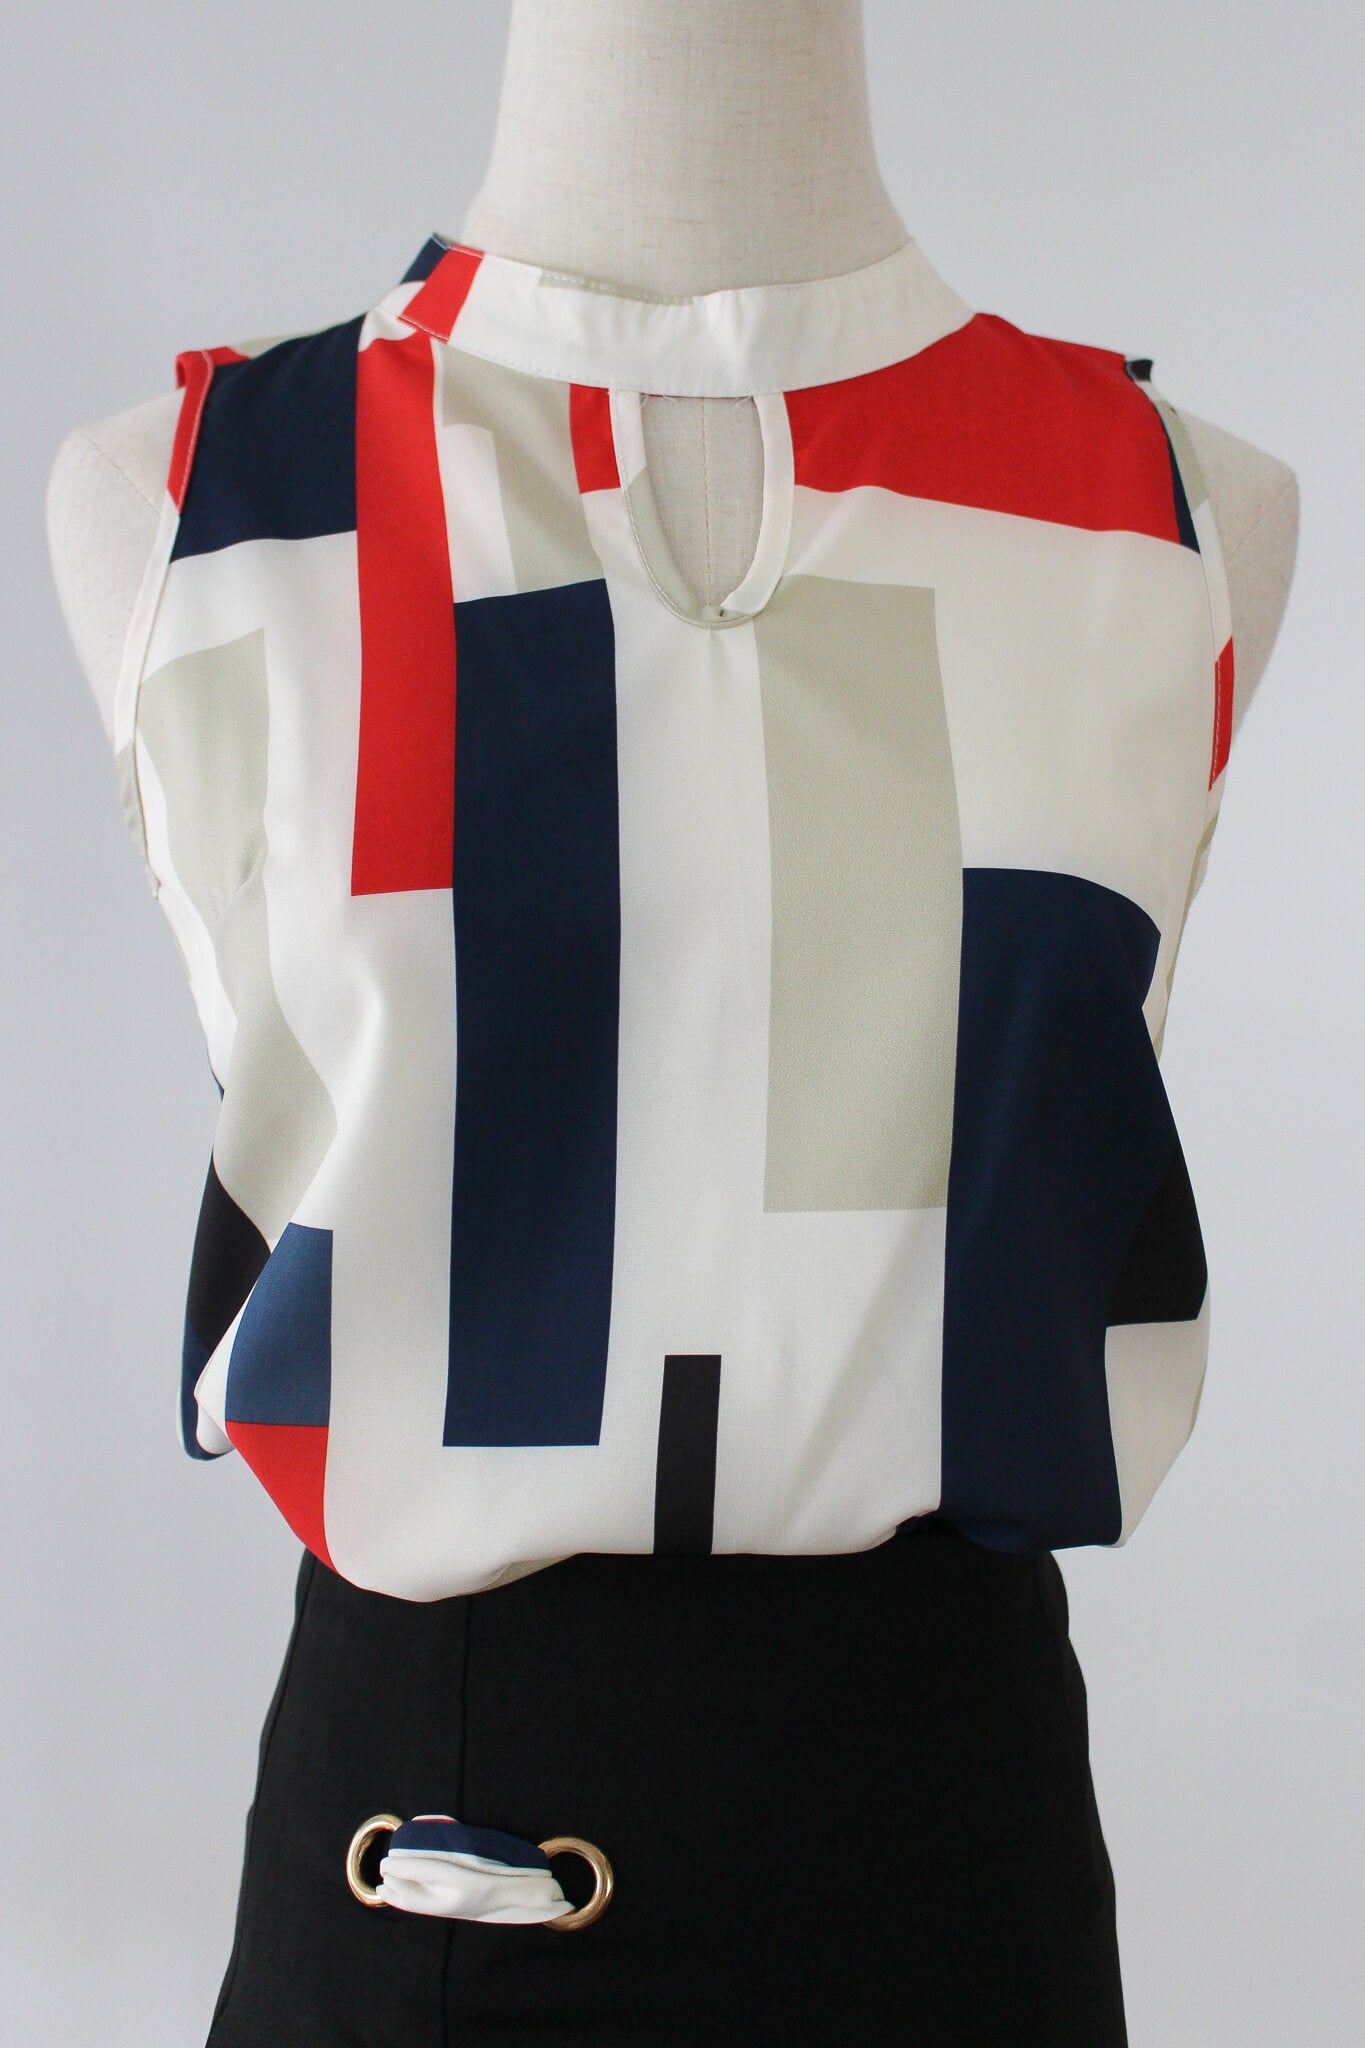 Colorblock blouse with ribboned skirt, perfect for work.